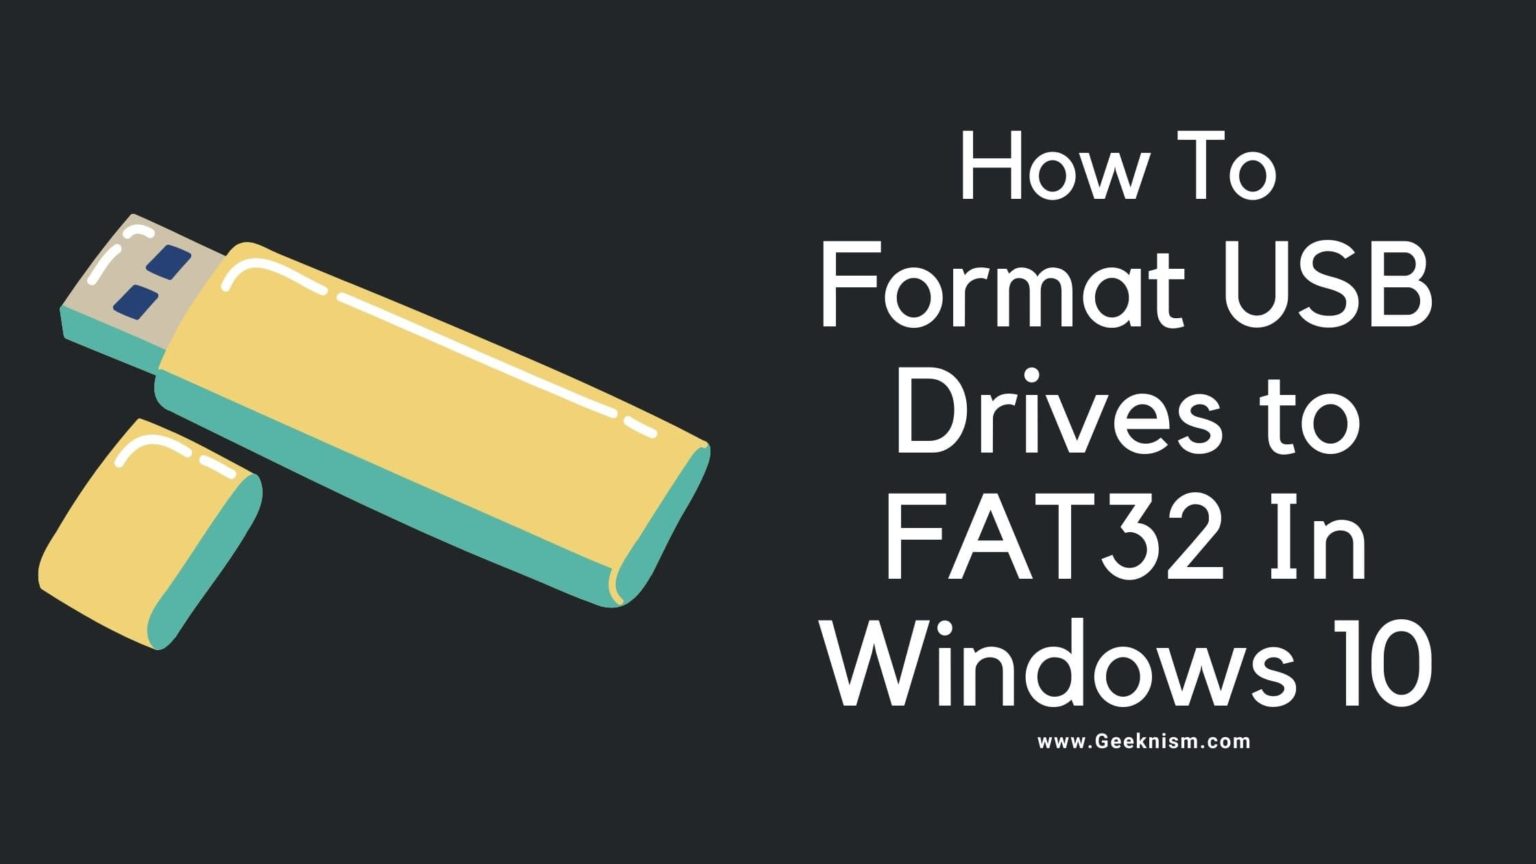 how do i format a usb drive to fat32 in windows 10